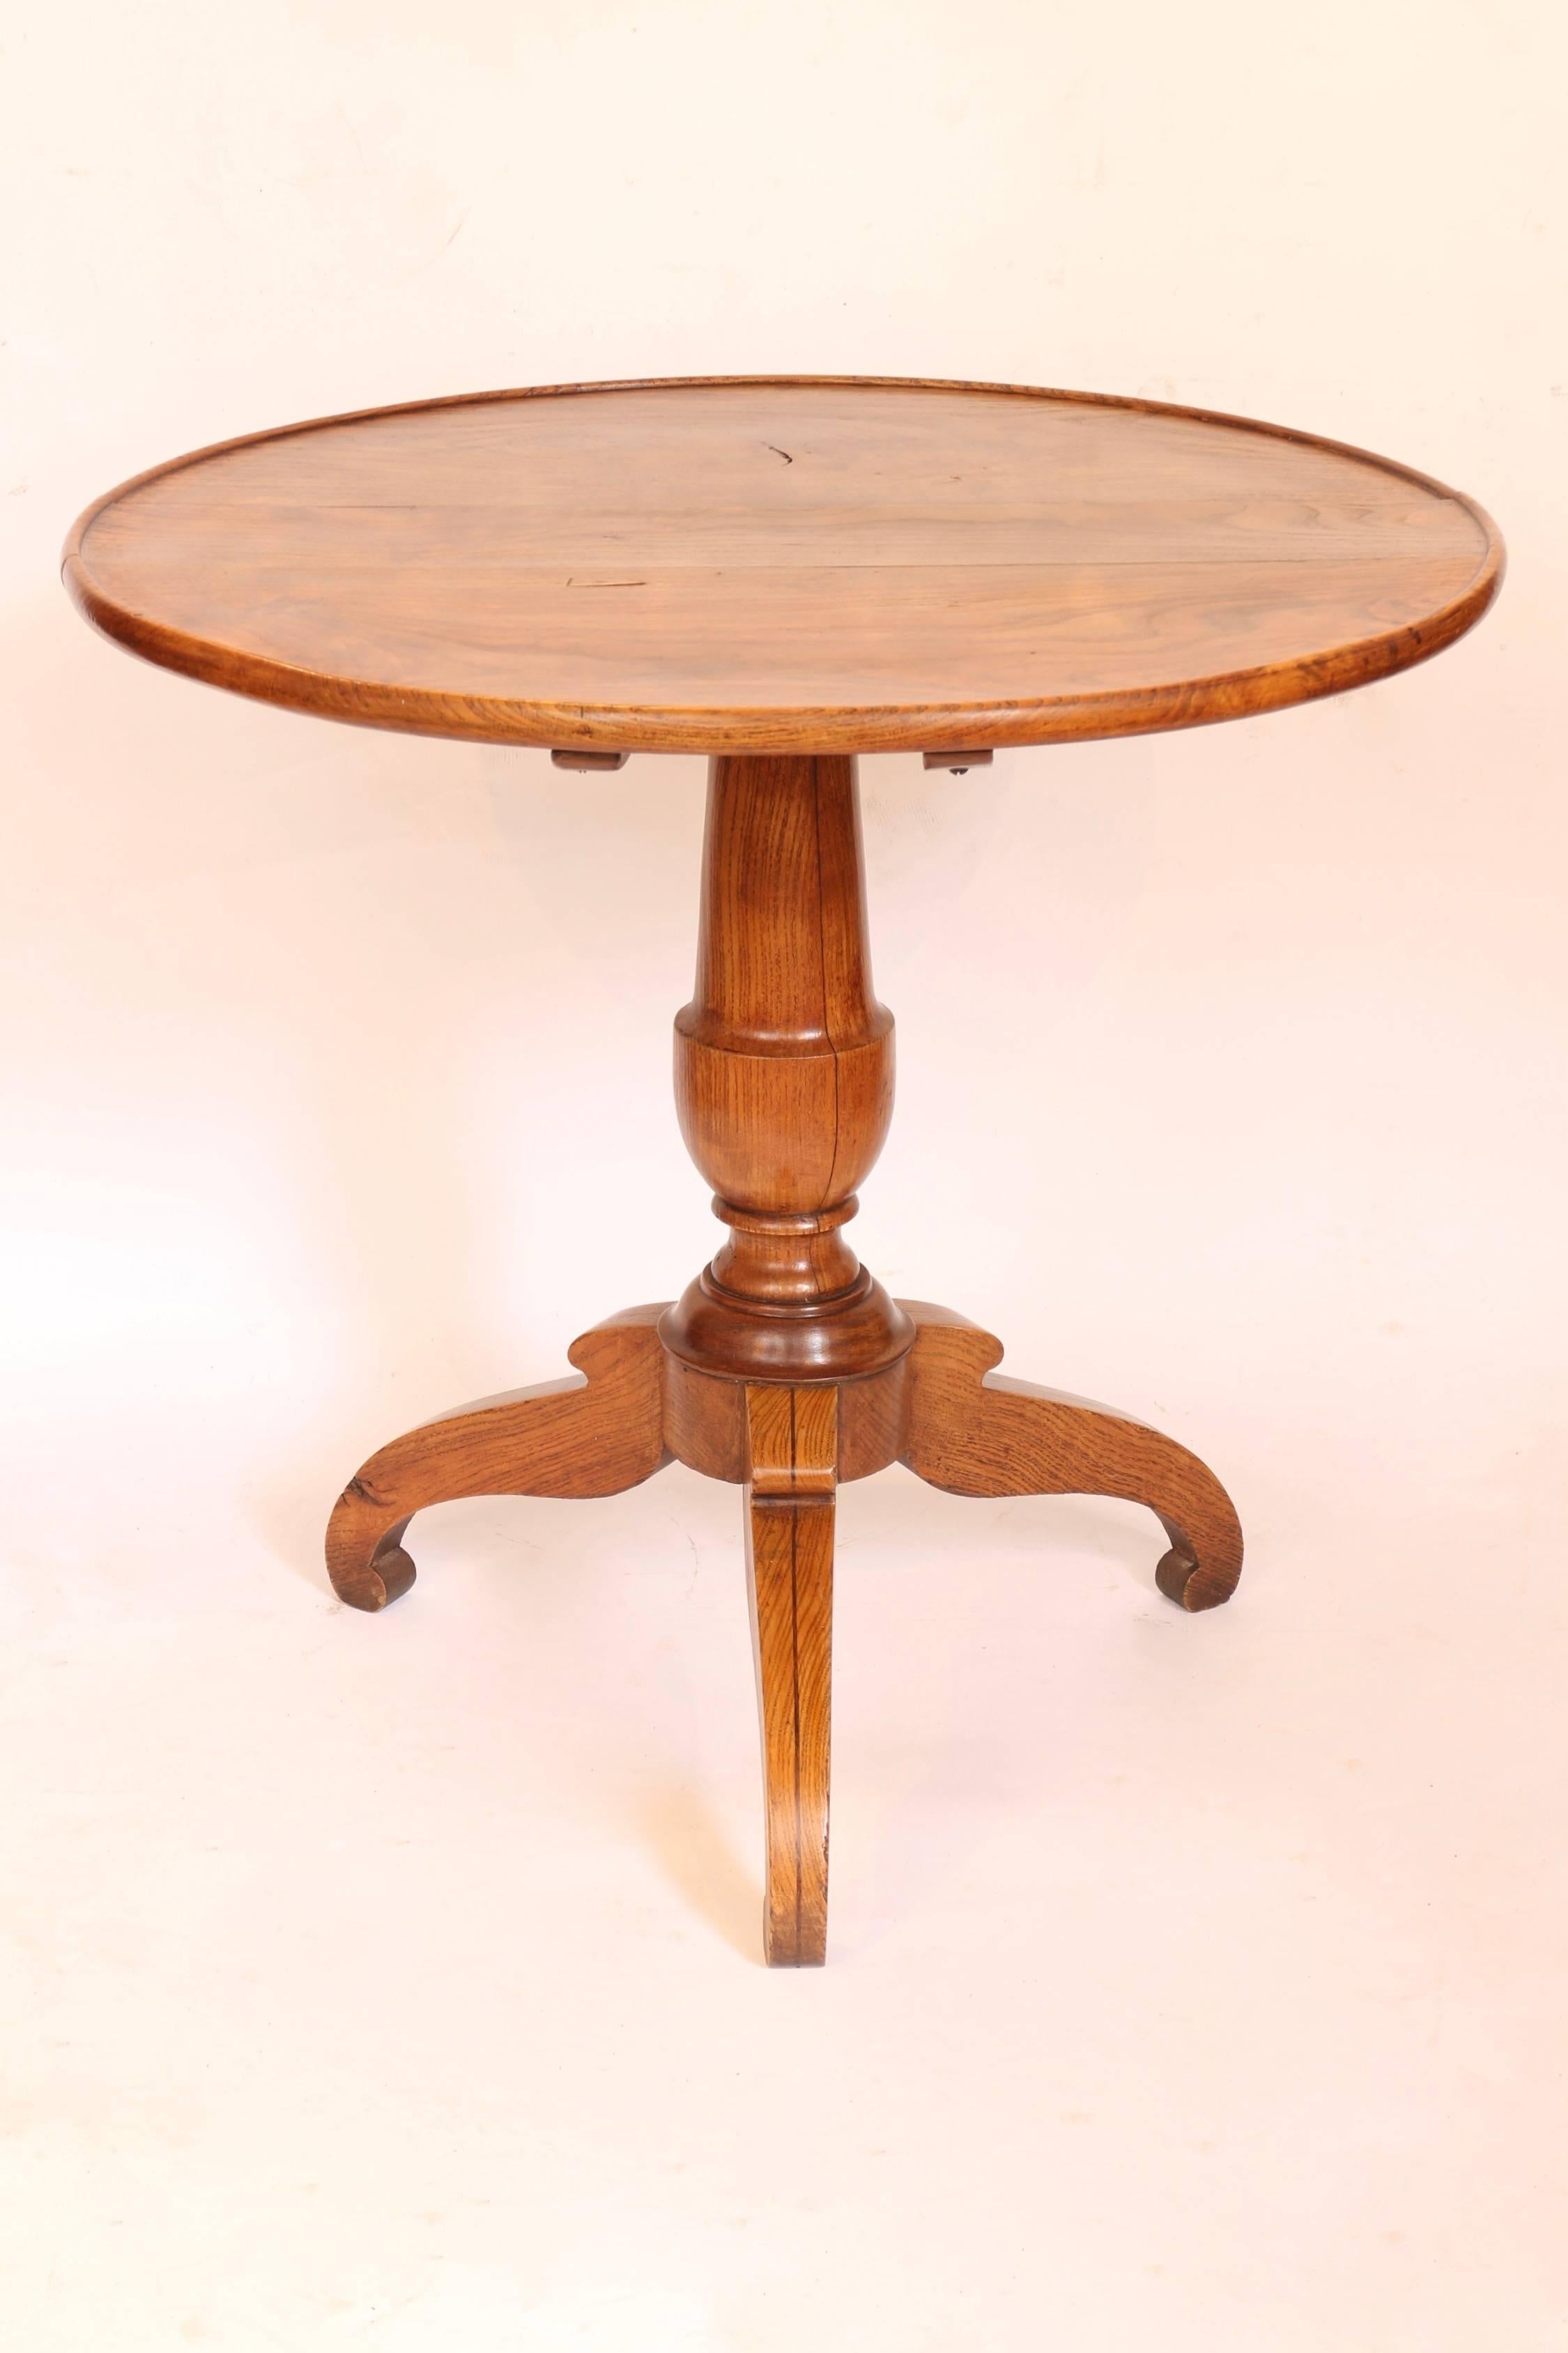 Tilt-top table in solid chestnut 
Two-piece top.